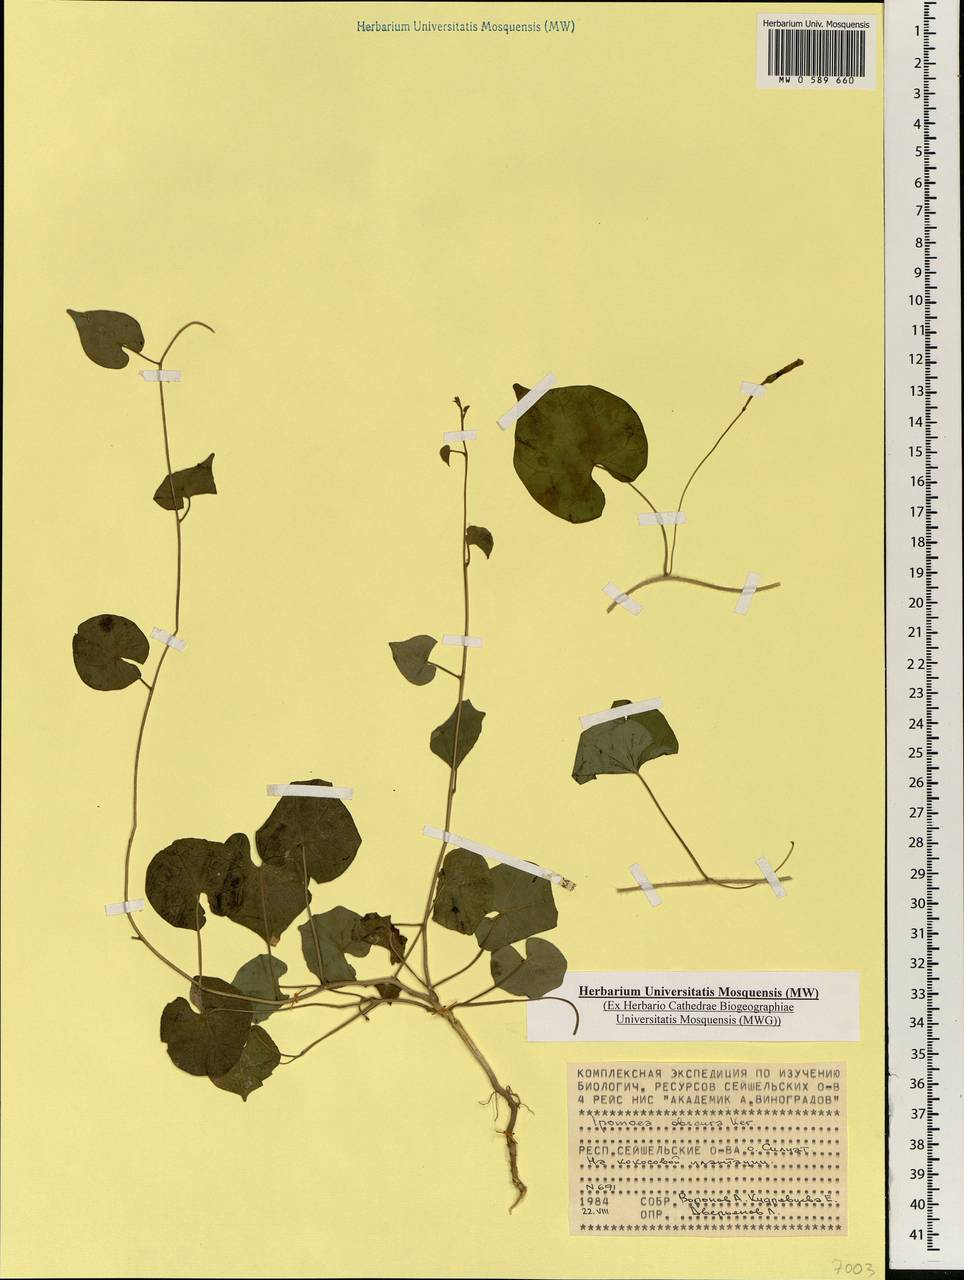 Ipomoea obscura (L.) Ker Gawl., Africa (AFR) (Seychelles)